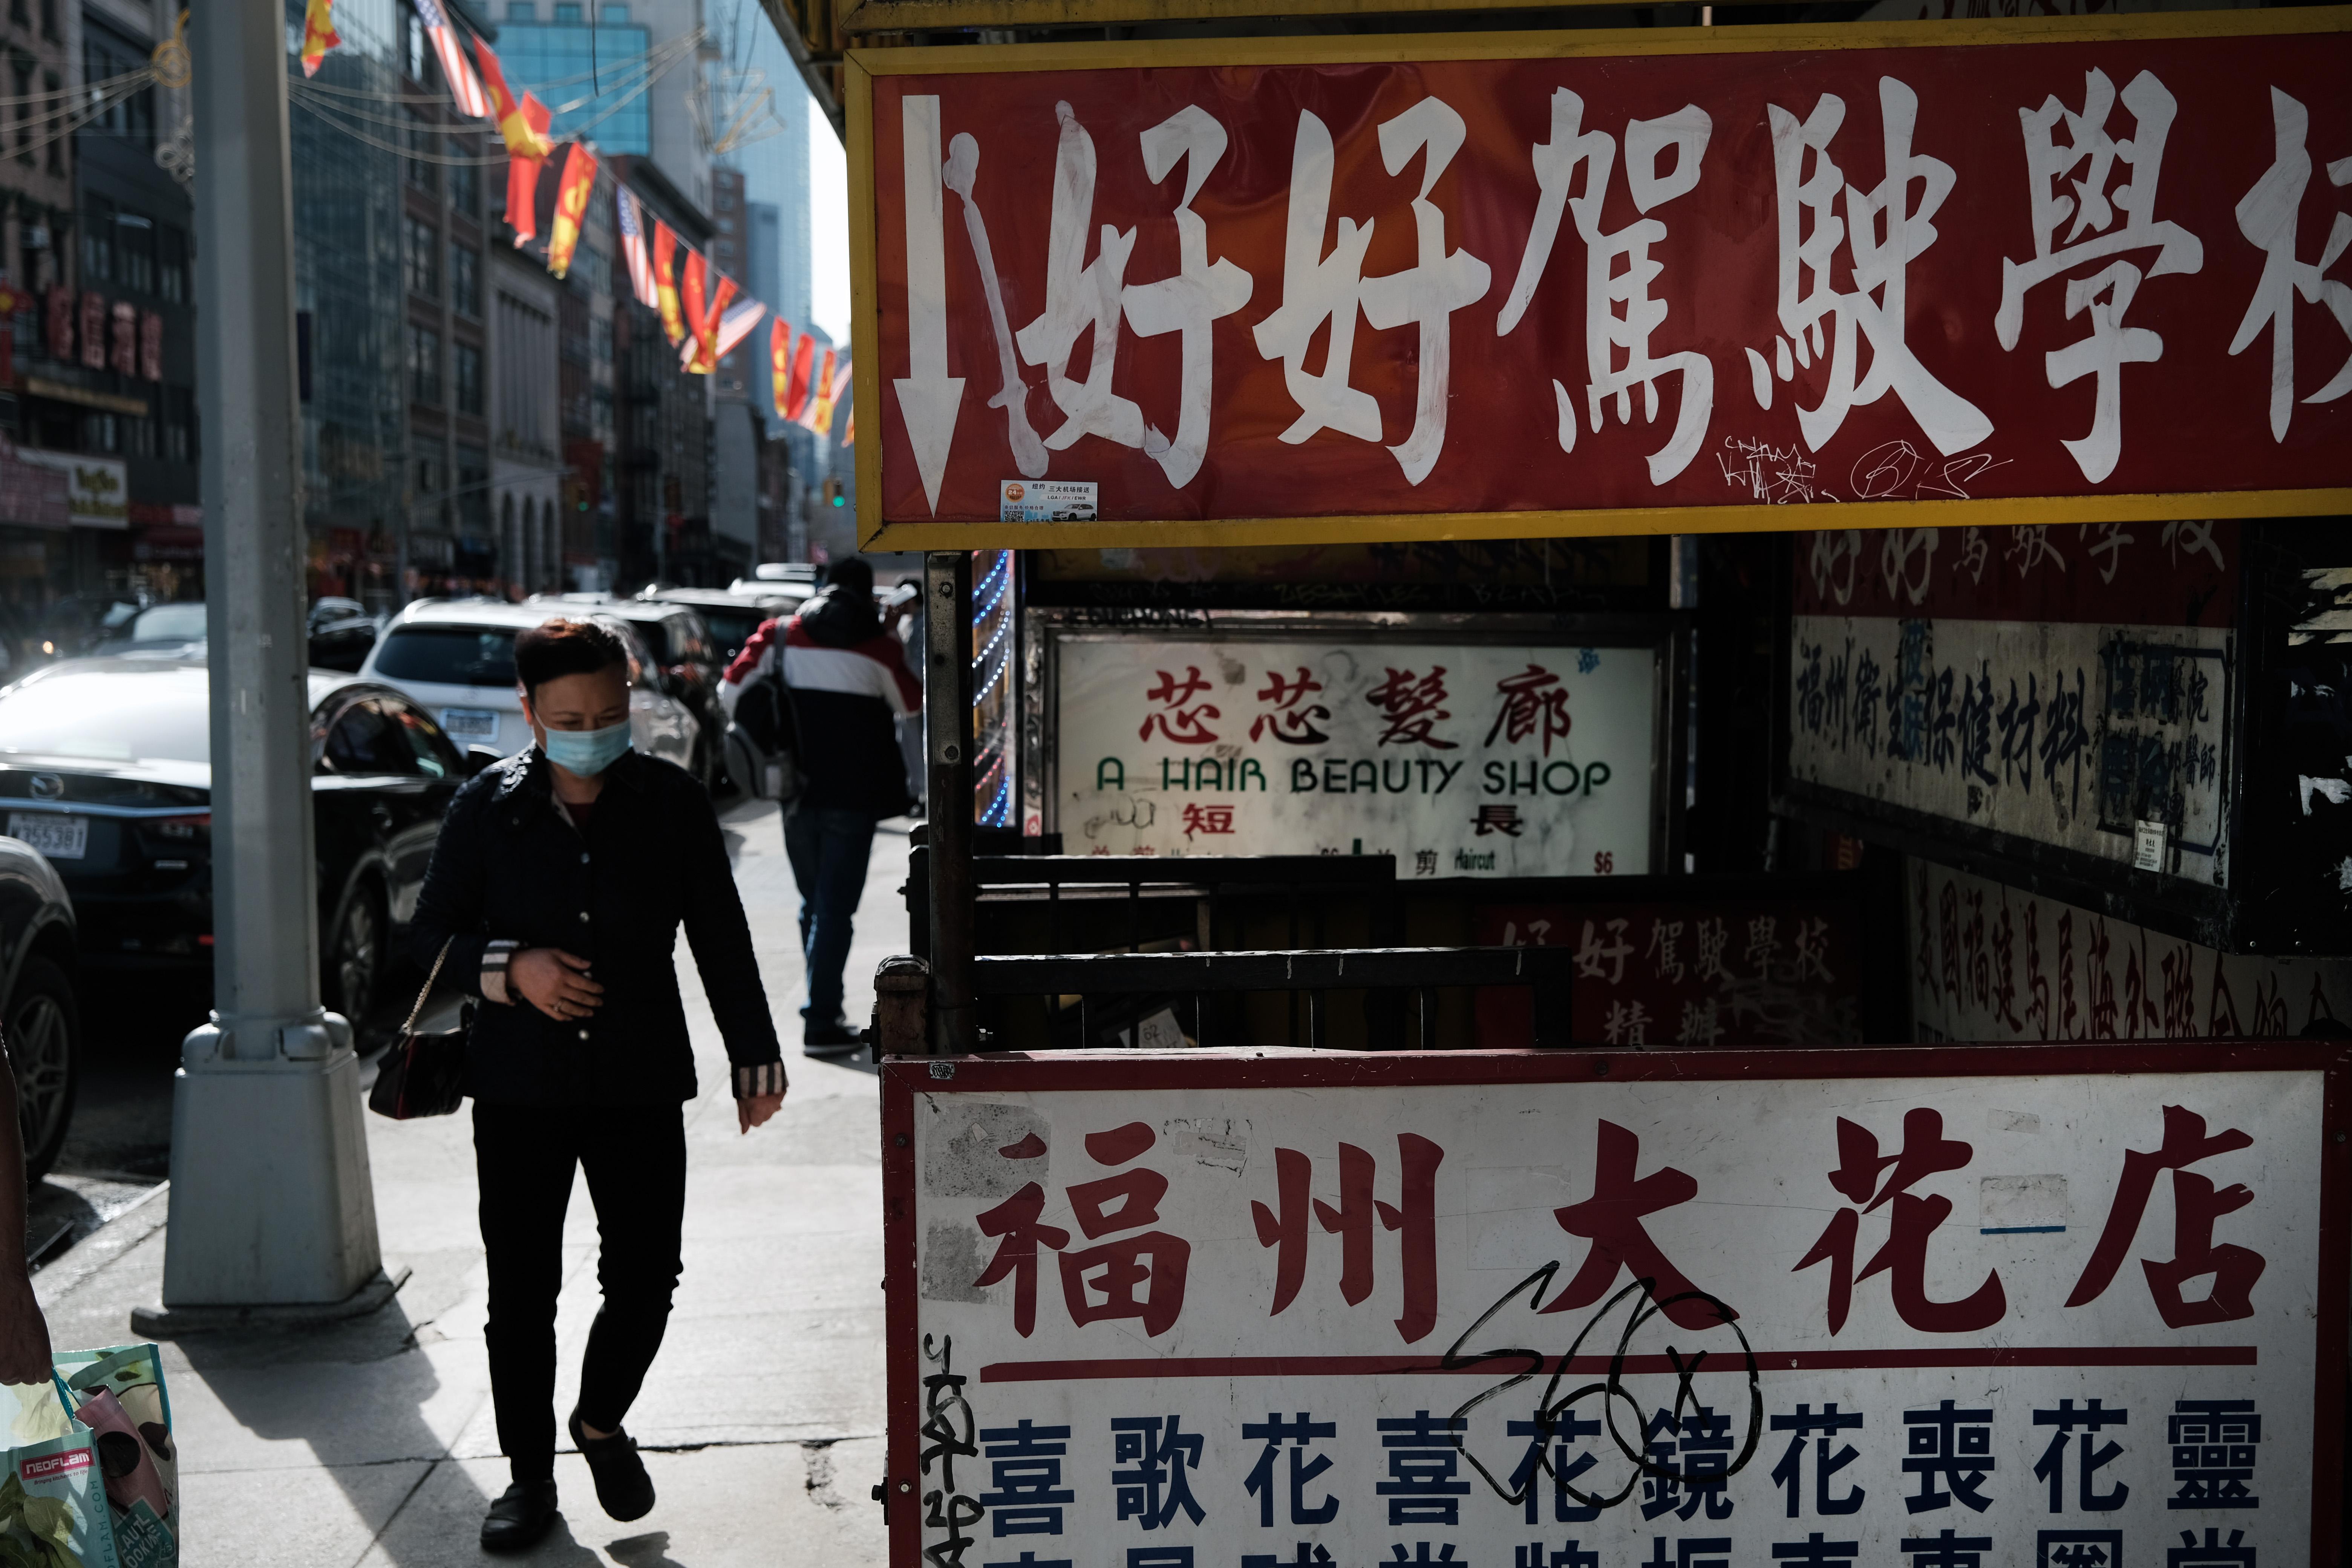 People walk on a sidewalk in Chinatown past signs in Chinese